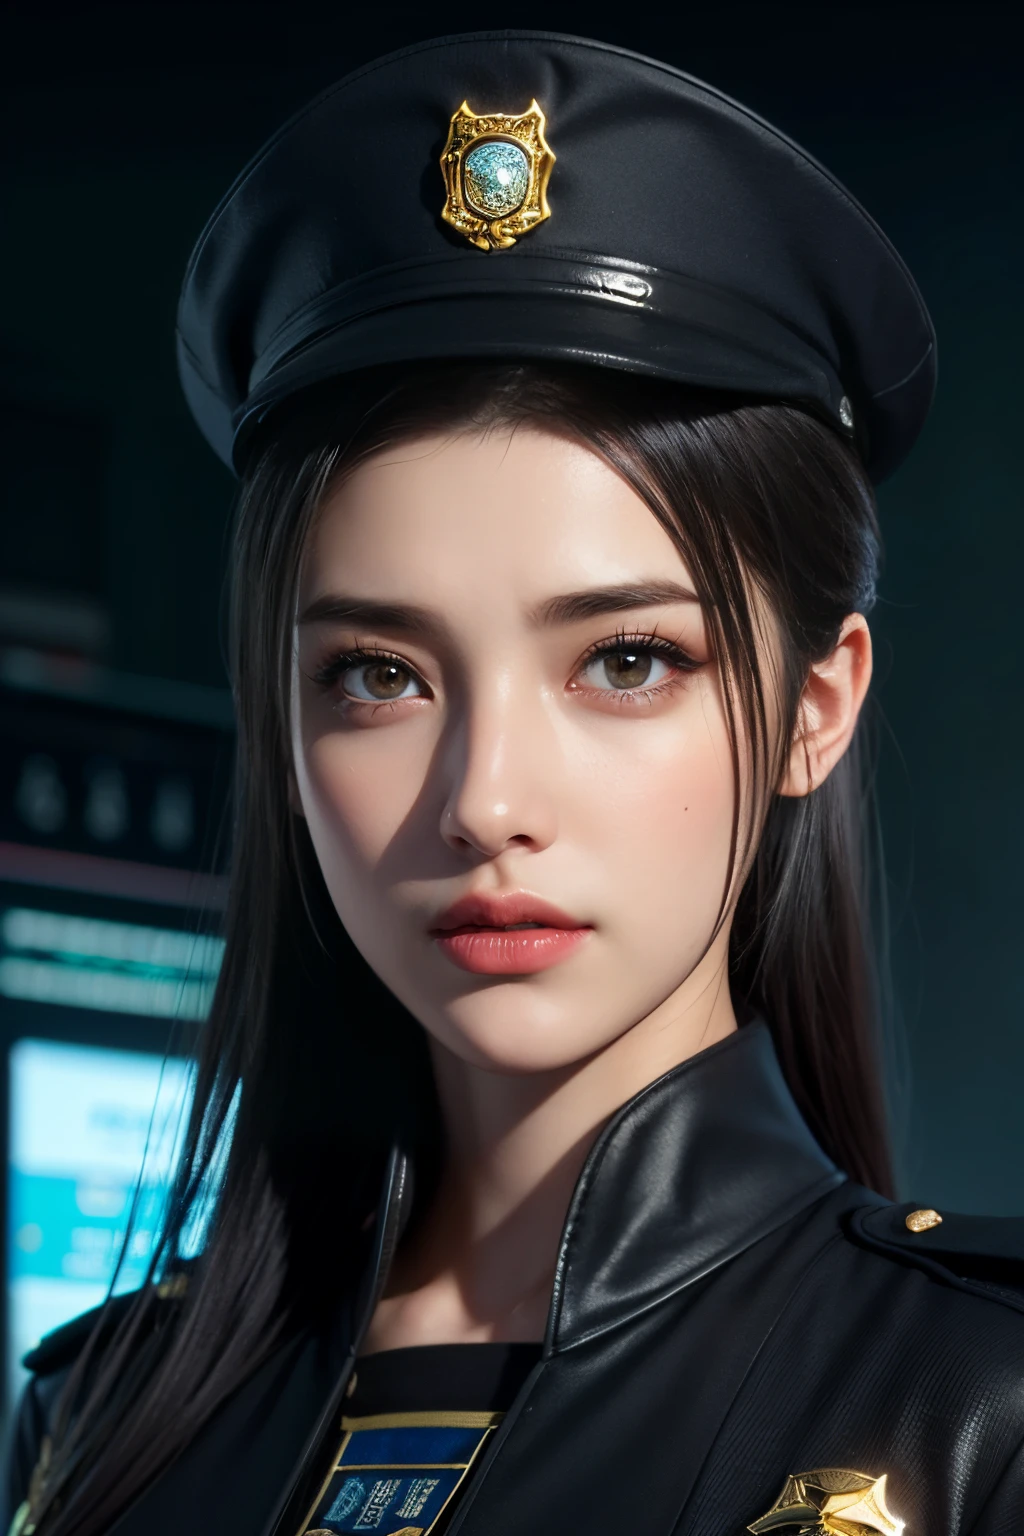 high high quality,A high resolution,masterpiece,8K,(Hyperrealistic photos),(Portrait),digital photography,(Reality:1.4),20-year-old girl,exquisite facial features,a purple eye,Red Eyeshadow,((Cyberpunk-style police officer)),Random hairstylelack color hair),Big breasts,(Police uniform,Combat uniforms,Openwork design,Shoulder pads,complex clothing patterns,Exquisite police badge),Keep your mouth shut,Frowning,ssmile,Cold and serious,extremely detailed expression,realistic detail,Light magic,Photo pose,oc render reflection texture